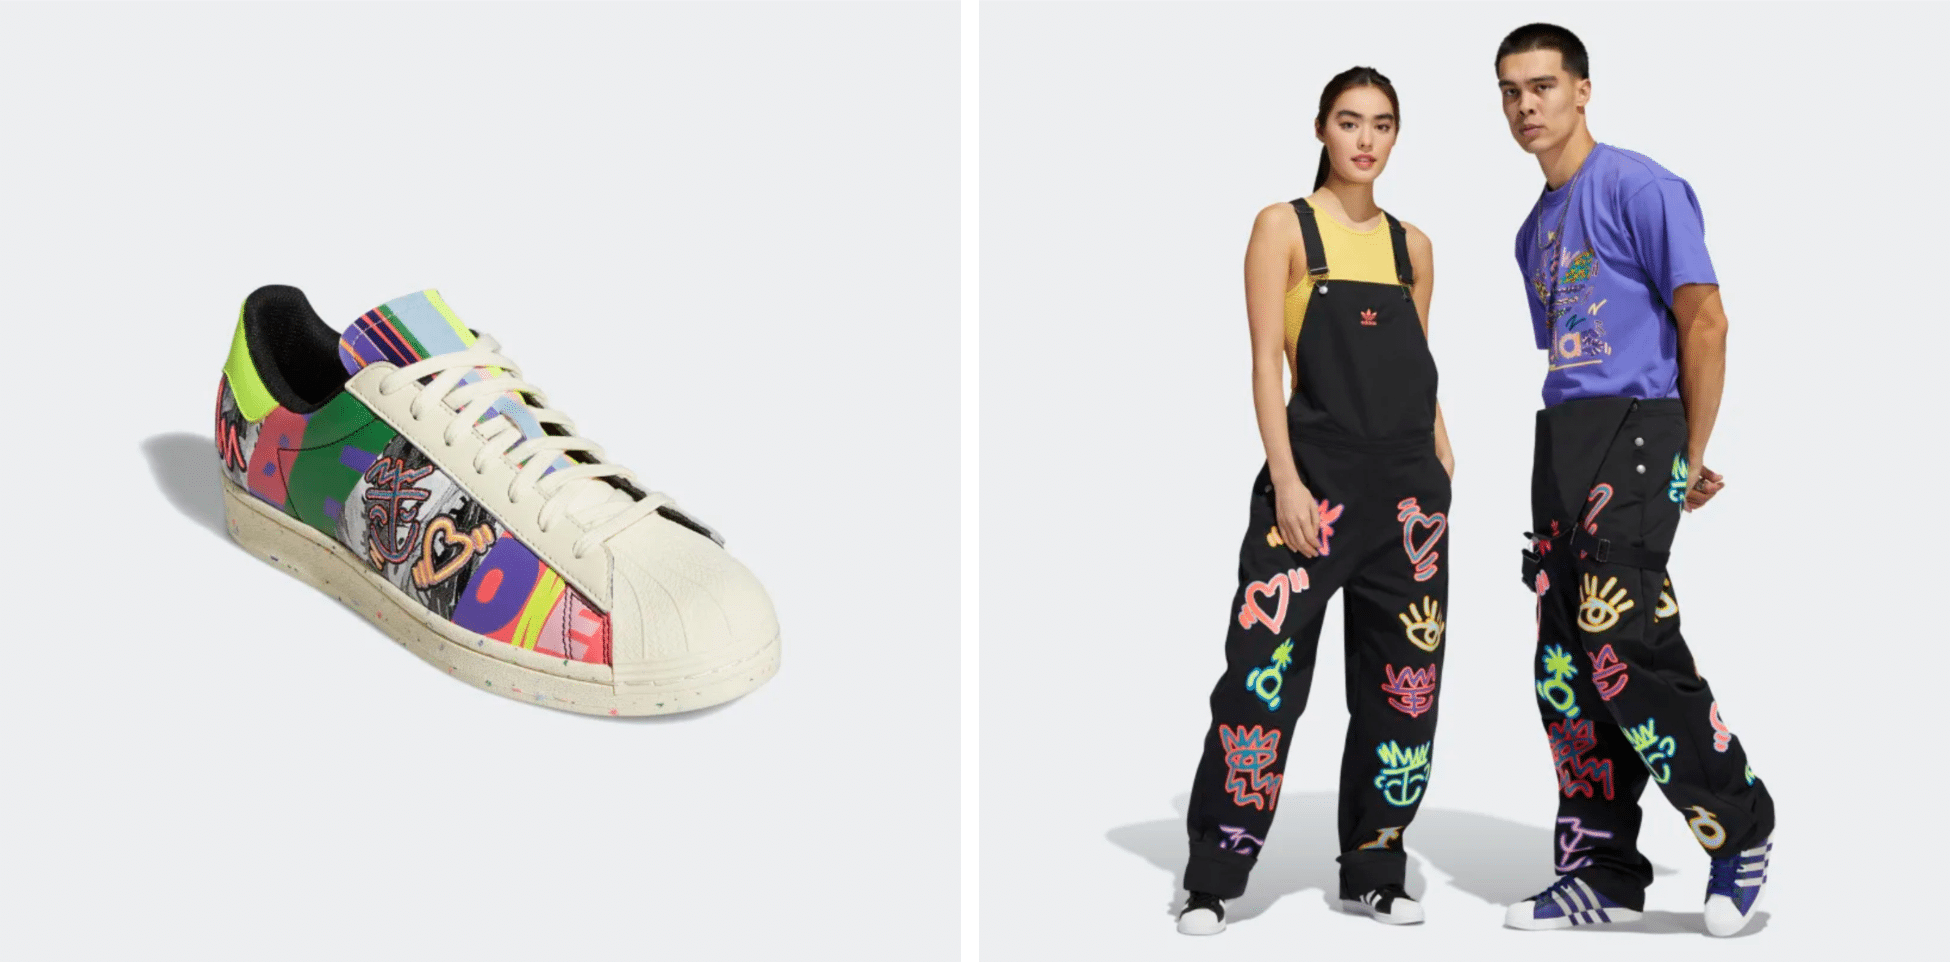 The collection features doodle designs by queer artist, Kris Andrew Small. (Adidas)